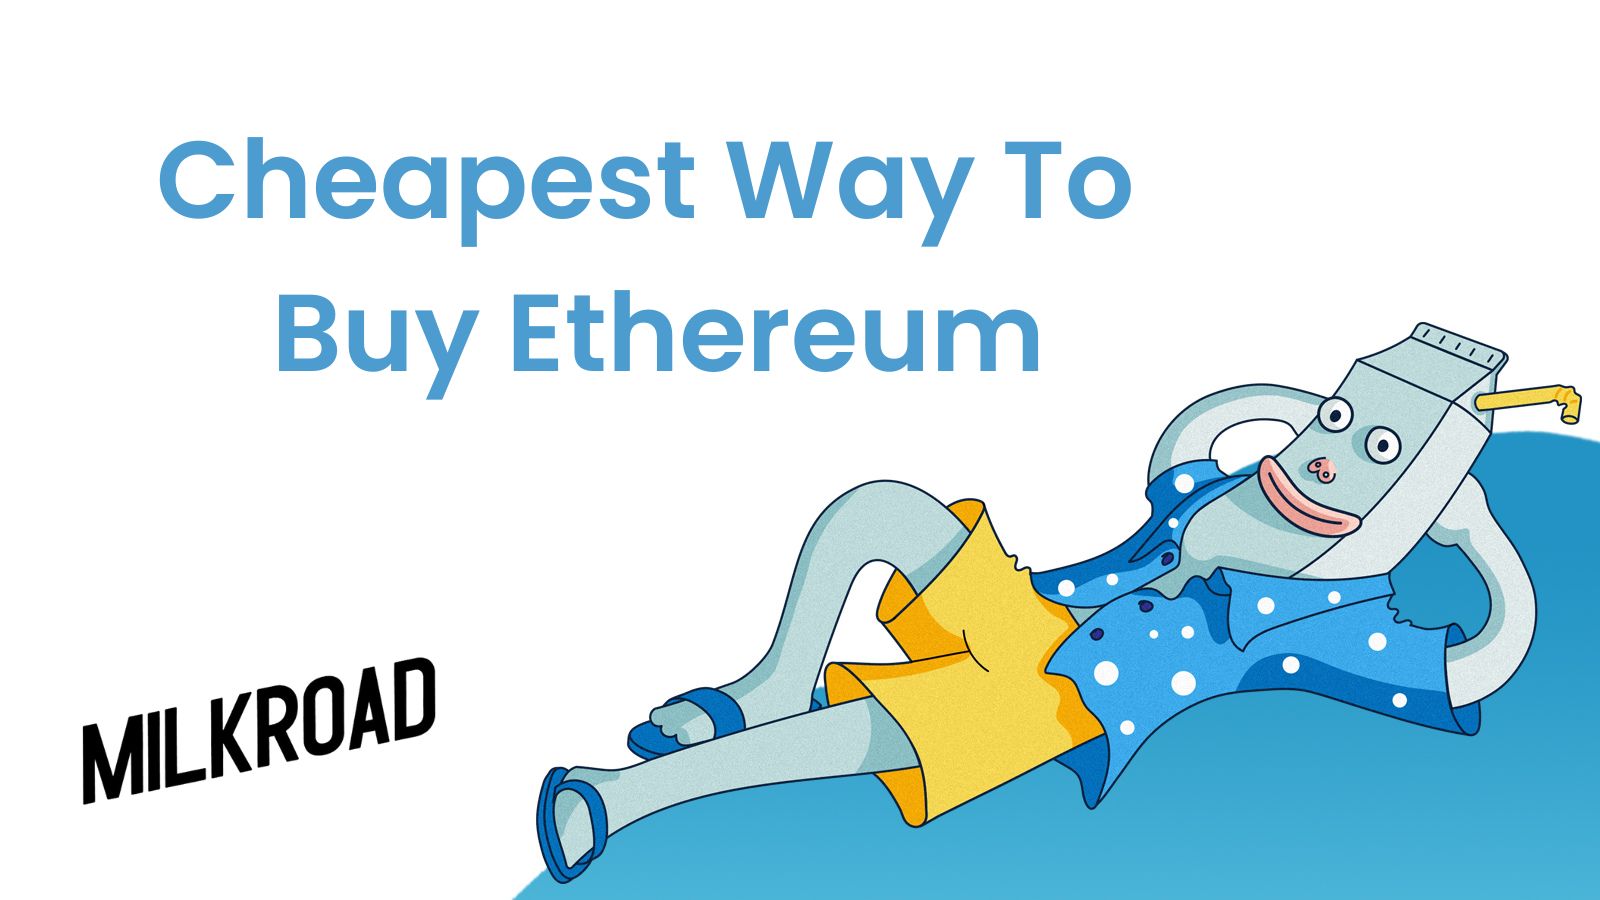 Cheapest Way to Buy Ethereum